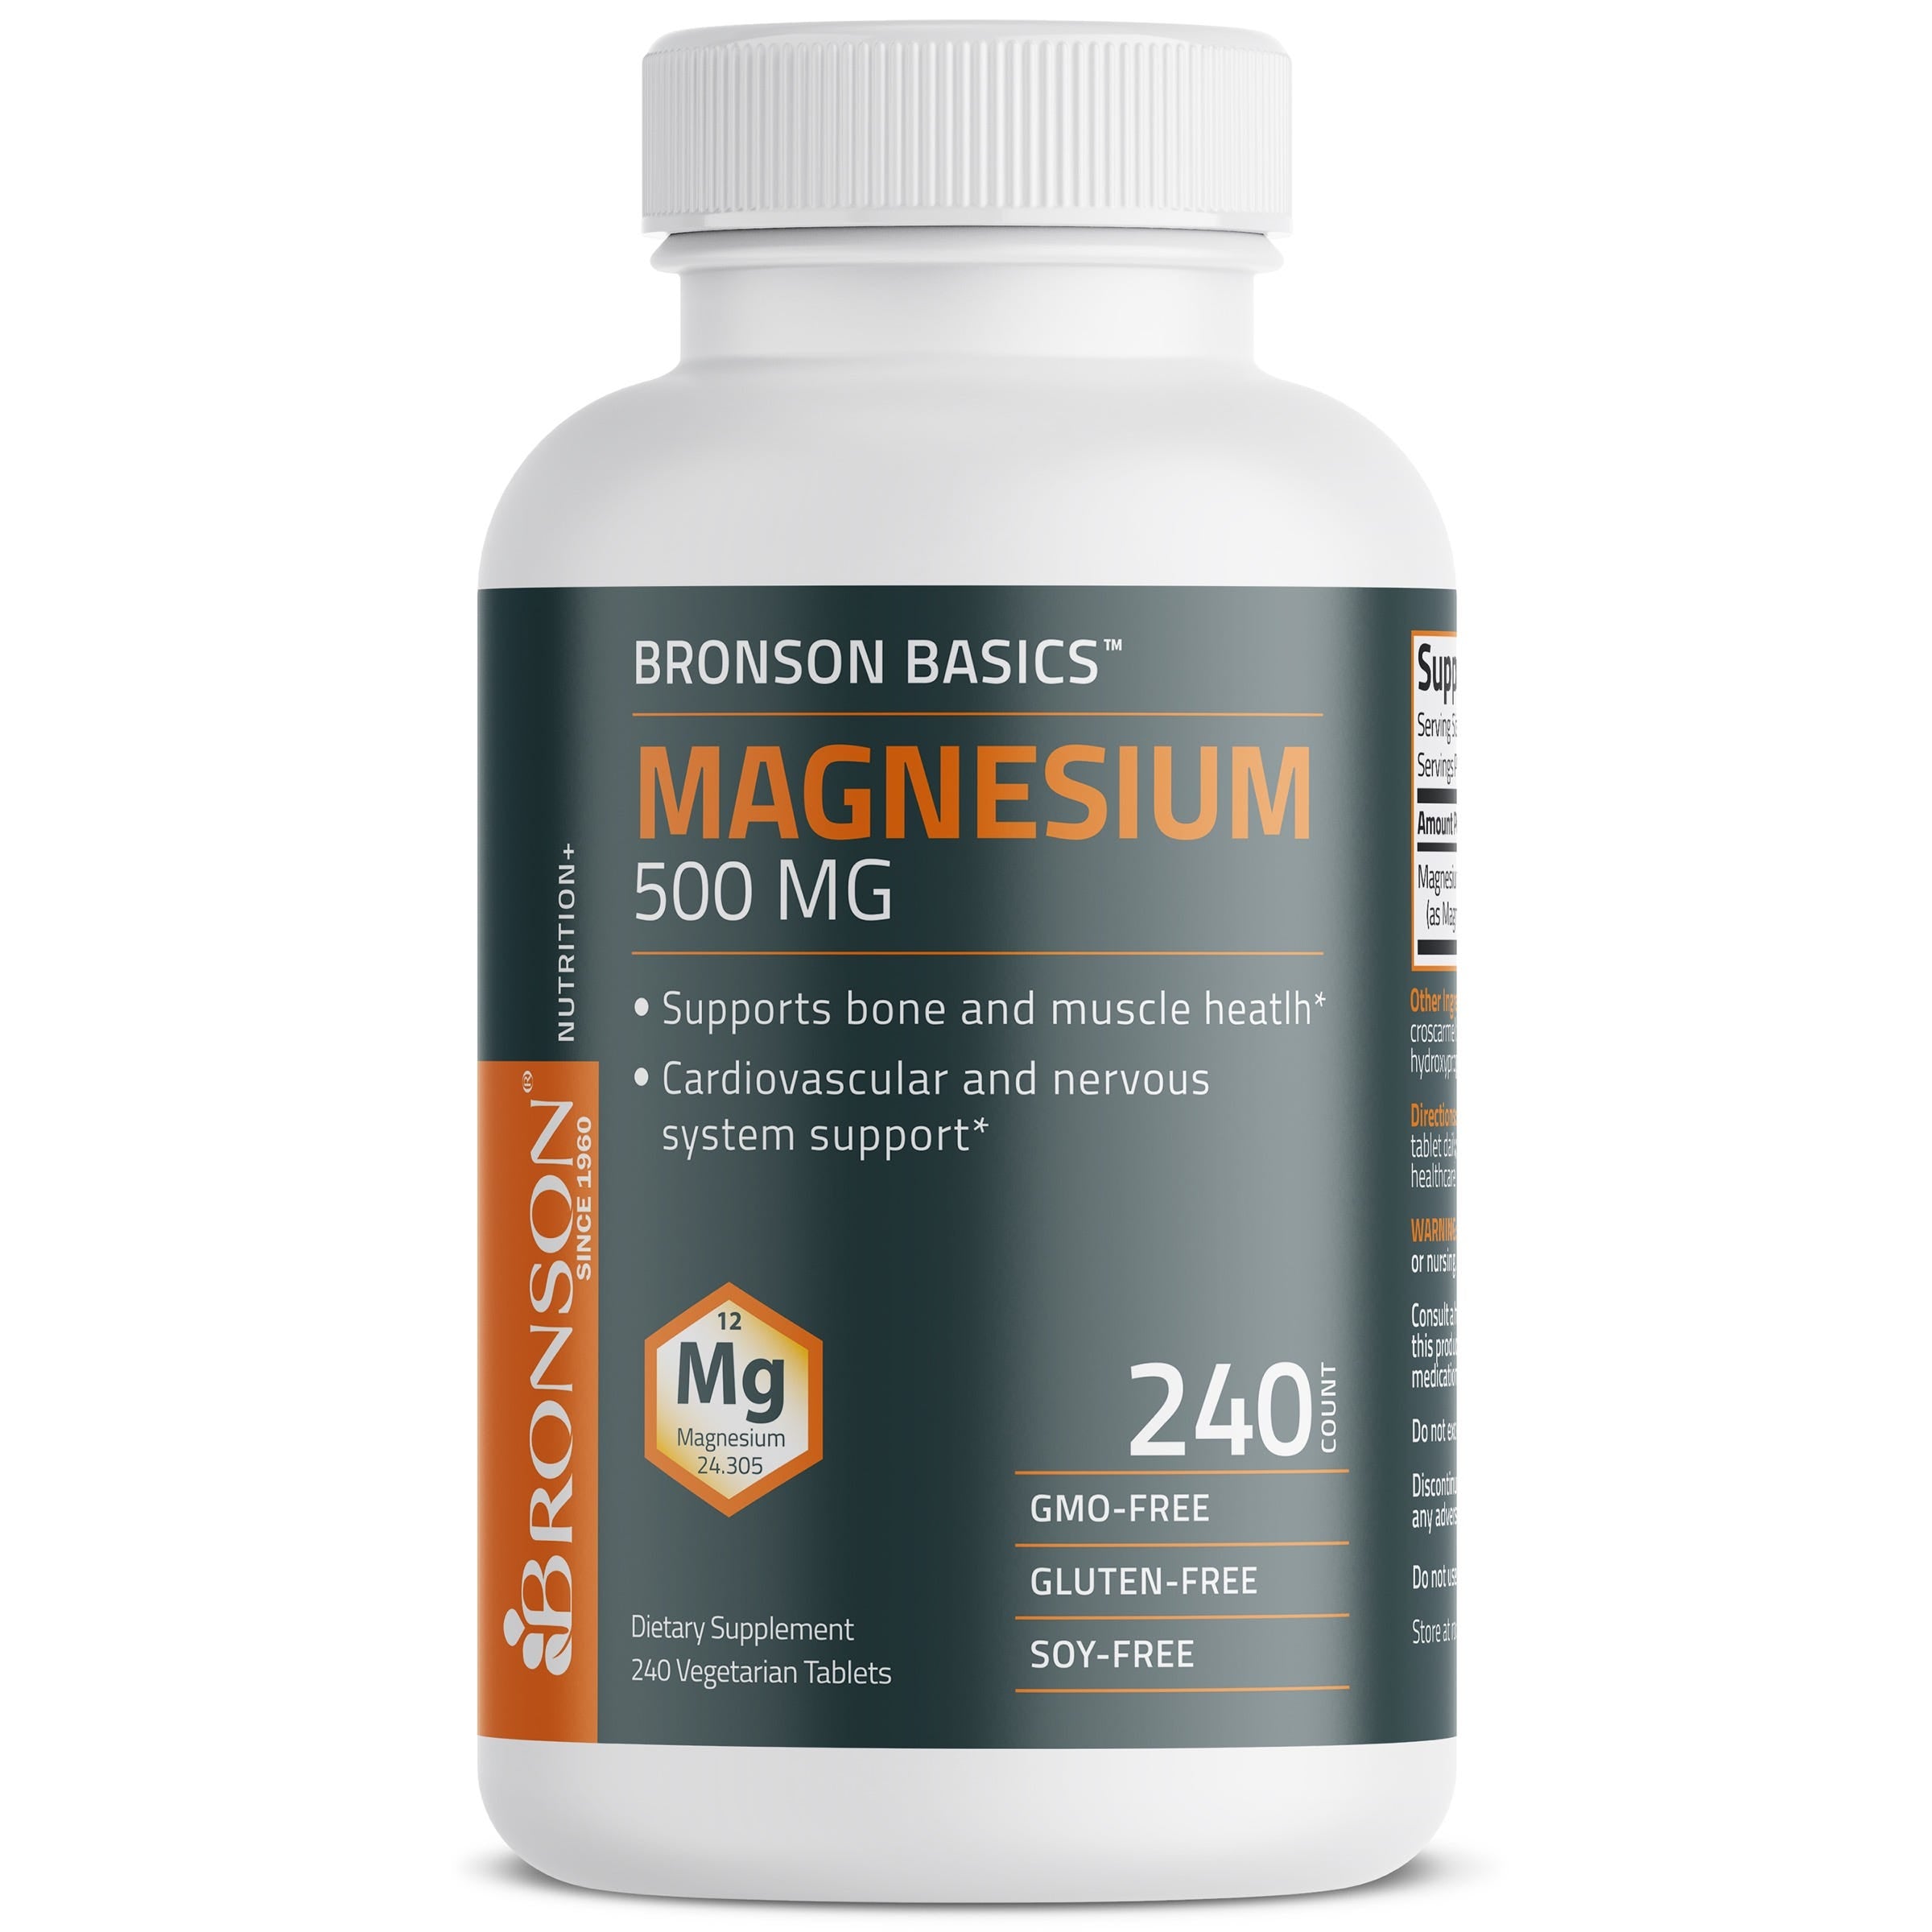 Magnesium 500 MG view 2 of 6